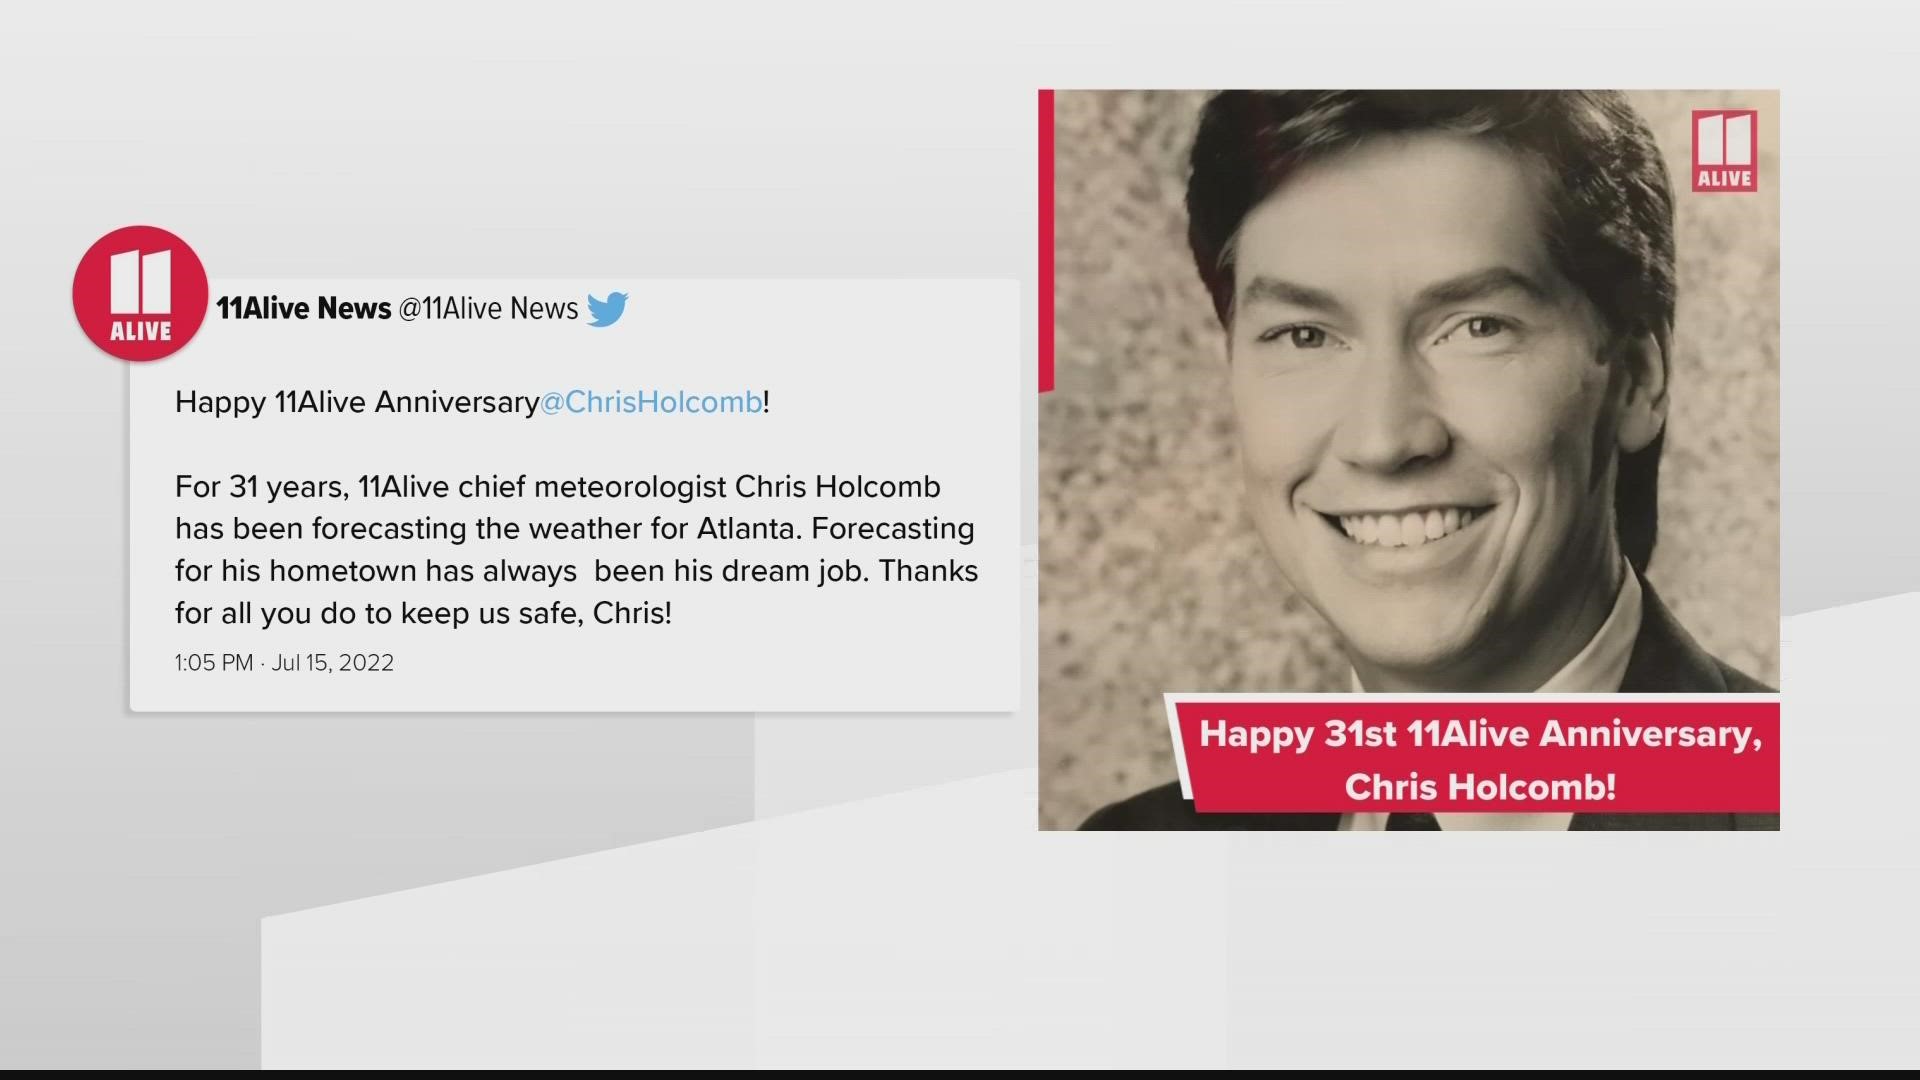 Chief Meteorologist Chris Holcomb is celebrating 31 years at 11Alive!